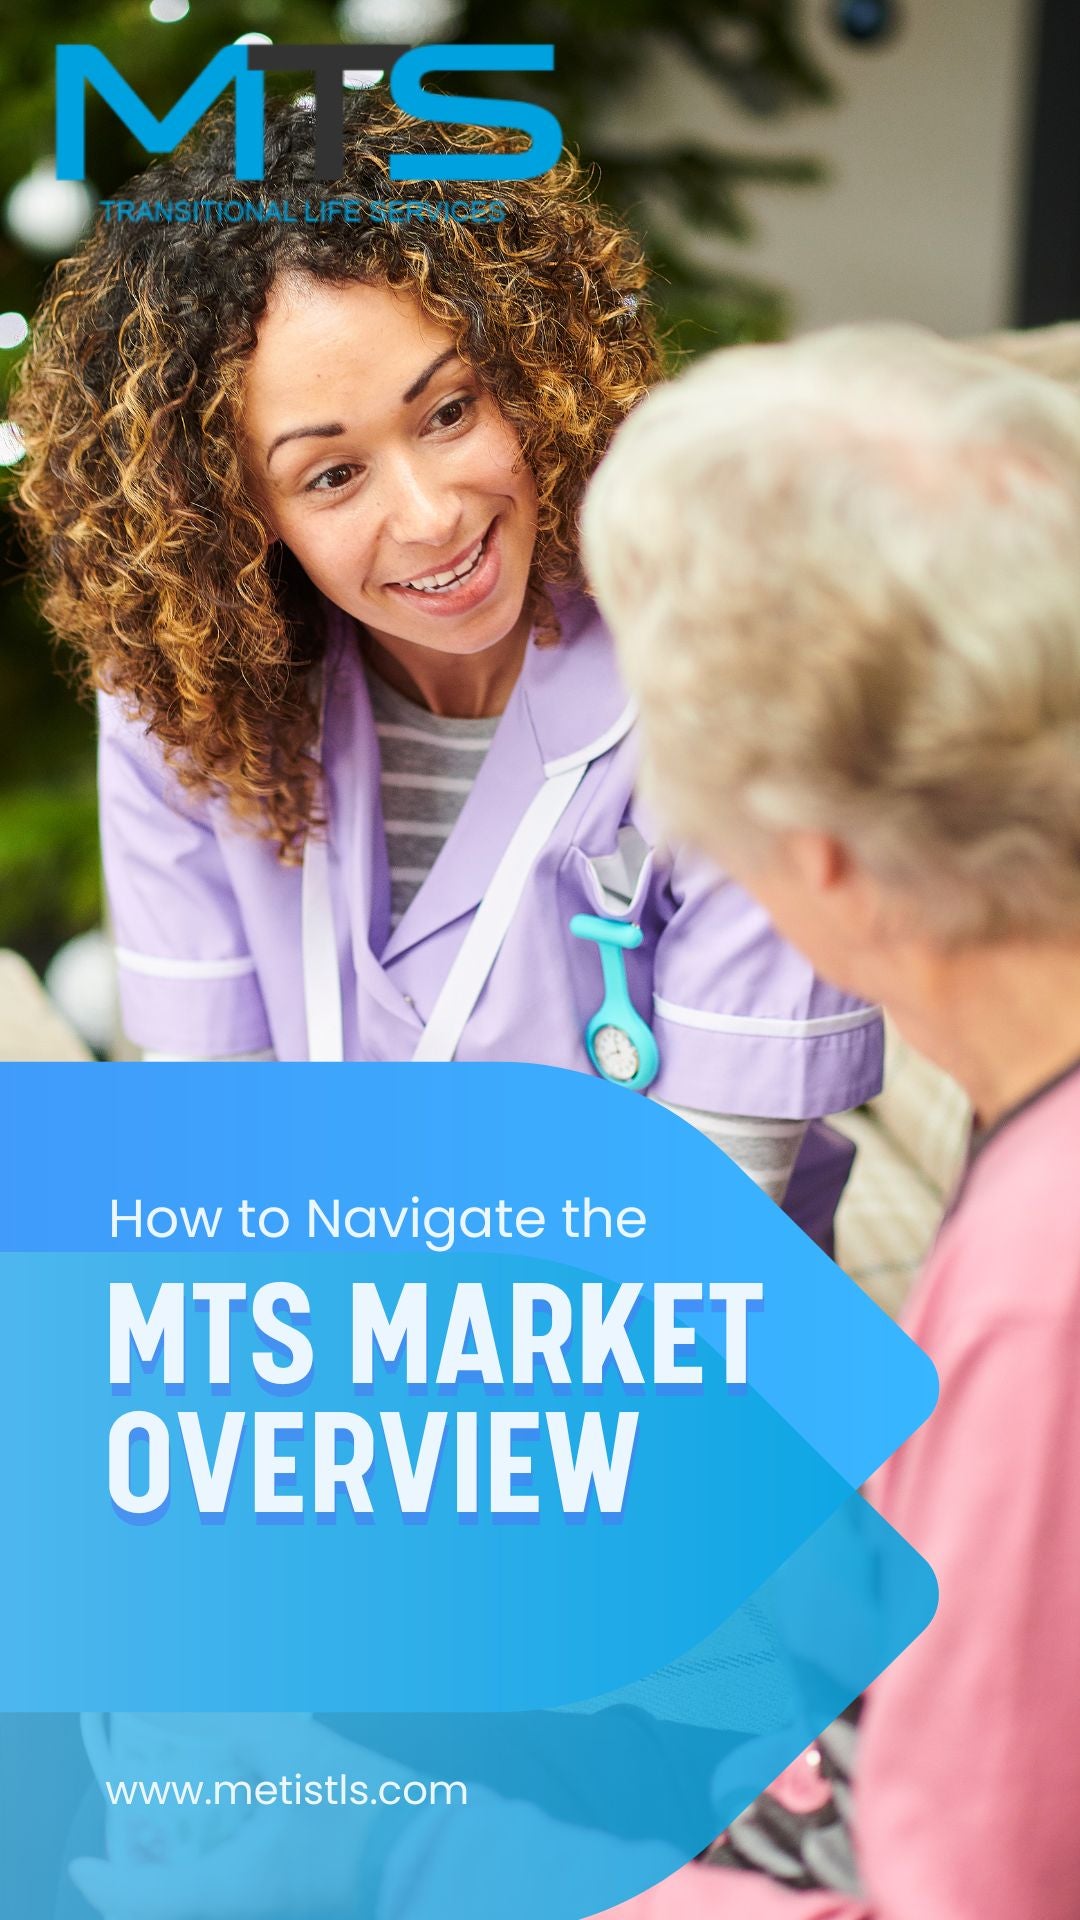 MTS Market Overview